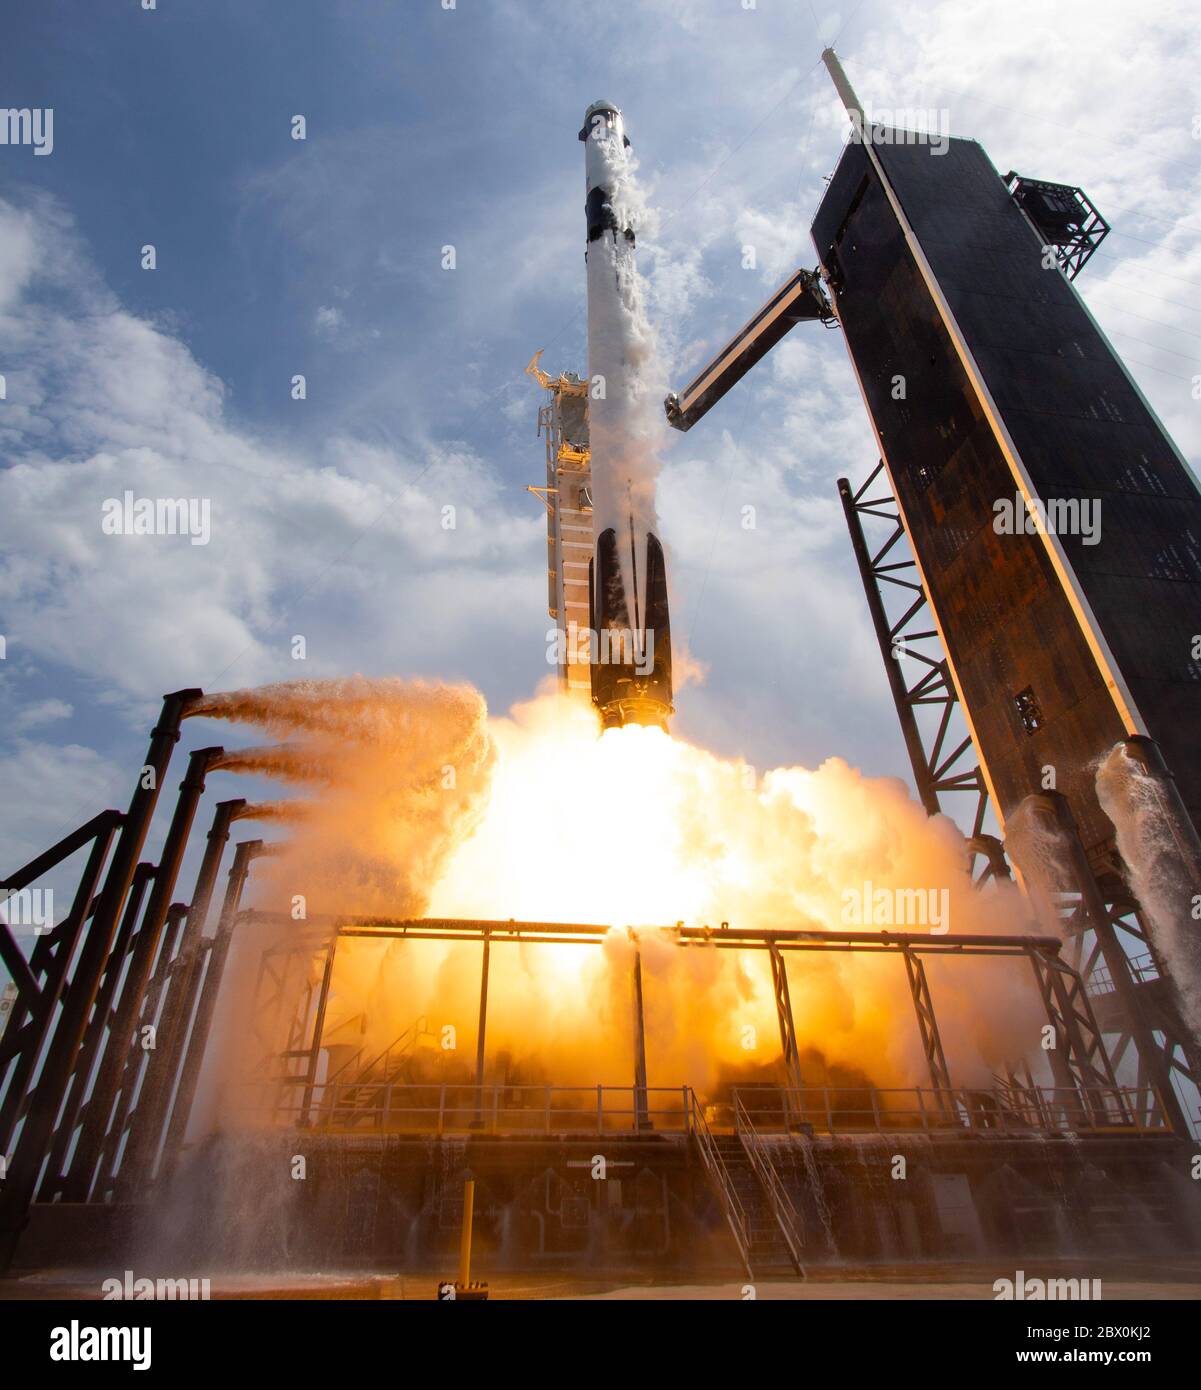 KENNEDY SPACE CENTER, USA - 30 May 2020 - The SpaceX Falcon 9 rocket carrying the company's Crew Dragon spacecraft is launched from Launch Complex 39A Stock Photo